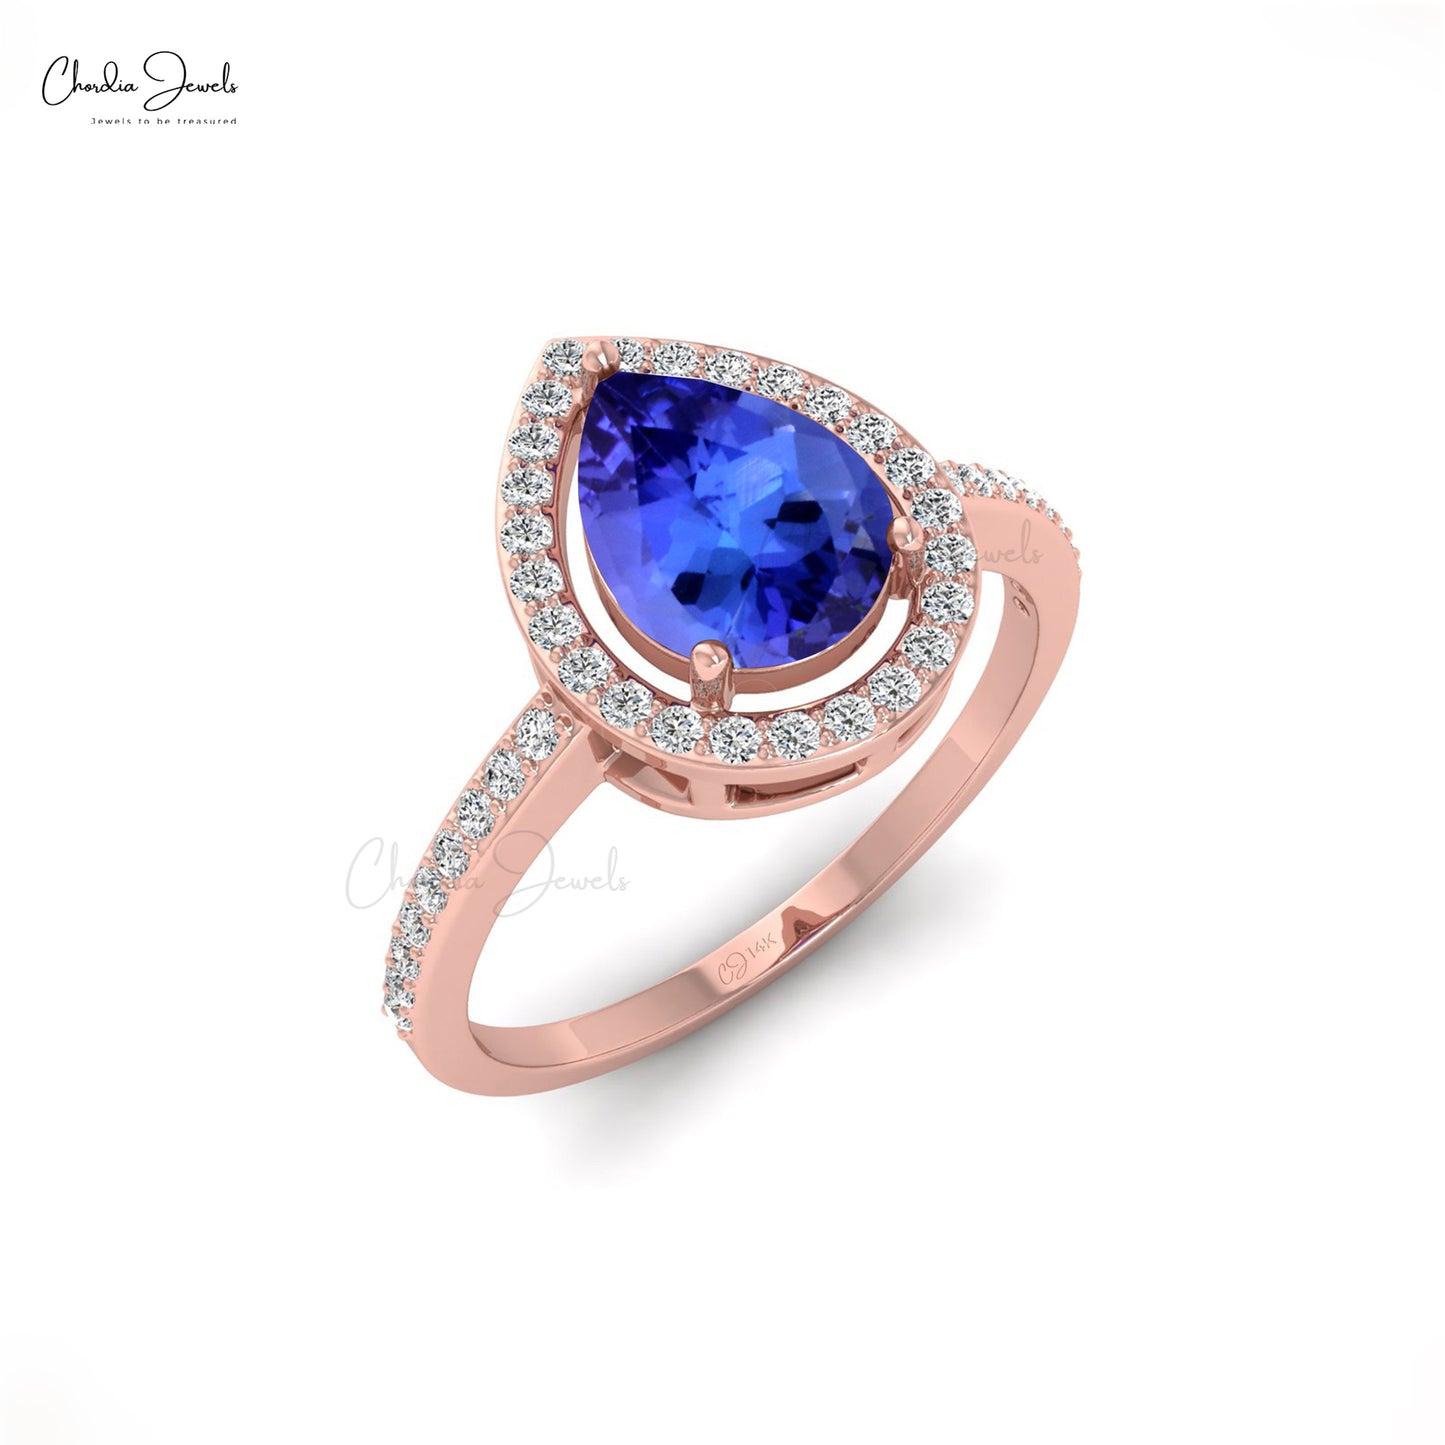 Load image into Gallery viewer, Natural Tanzanite Halo Ring In Solid 14k Gold Diamond Studded December Birthstone Ring
